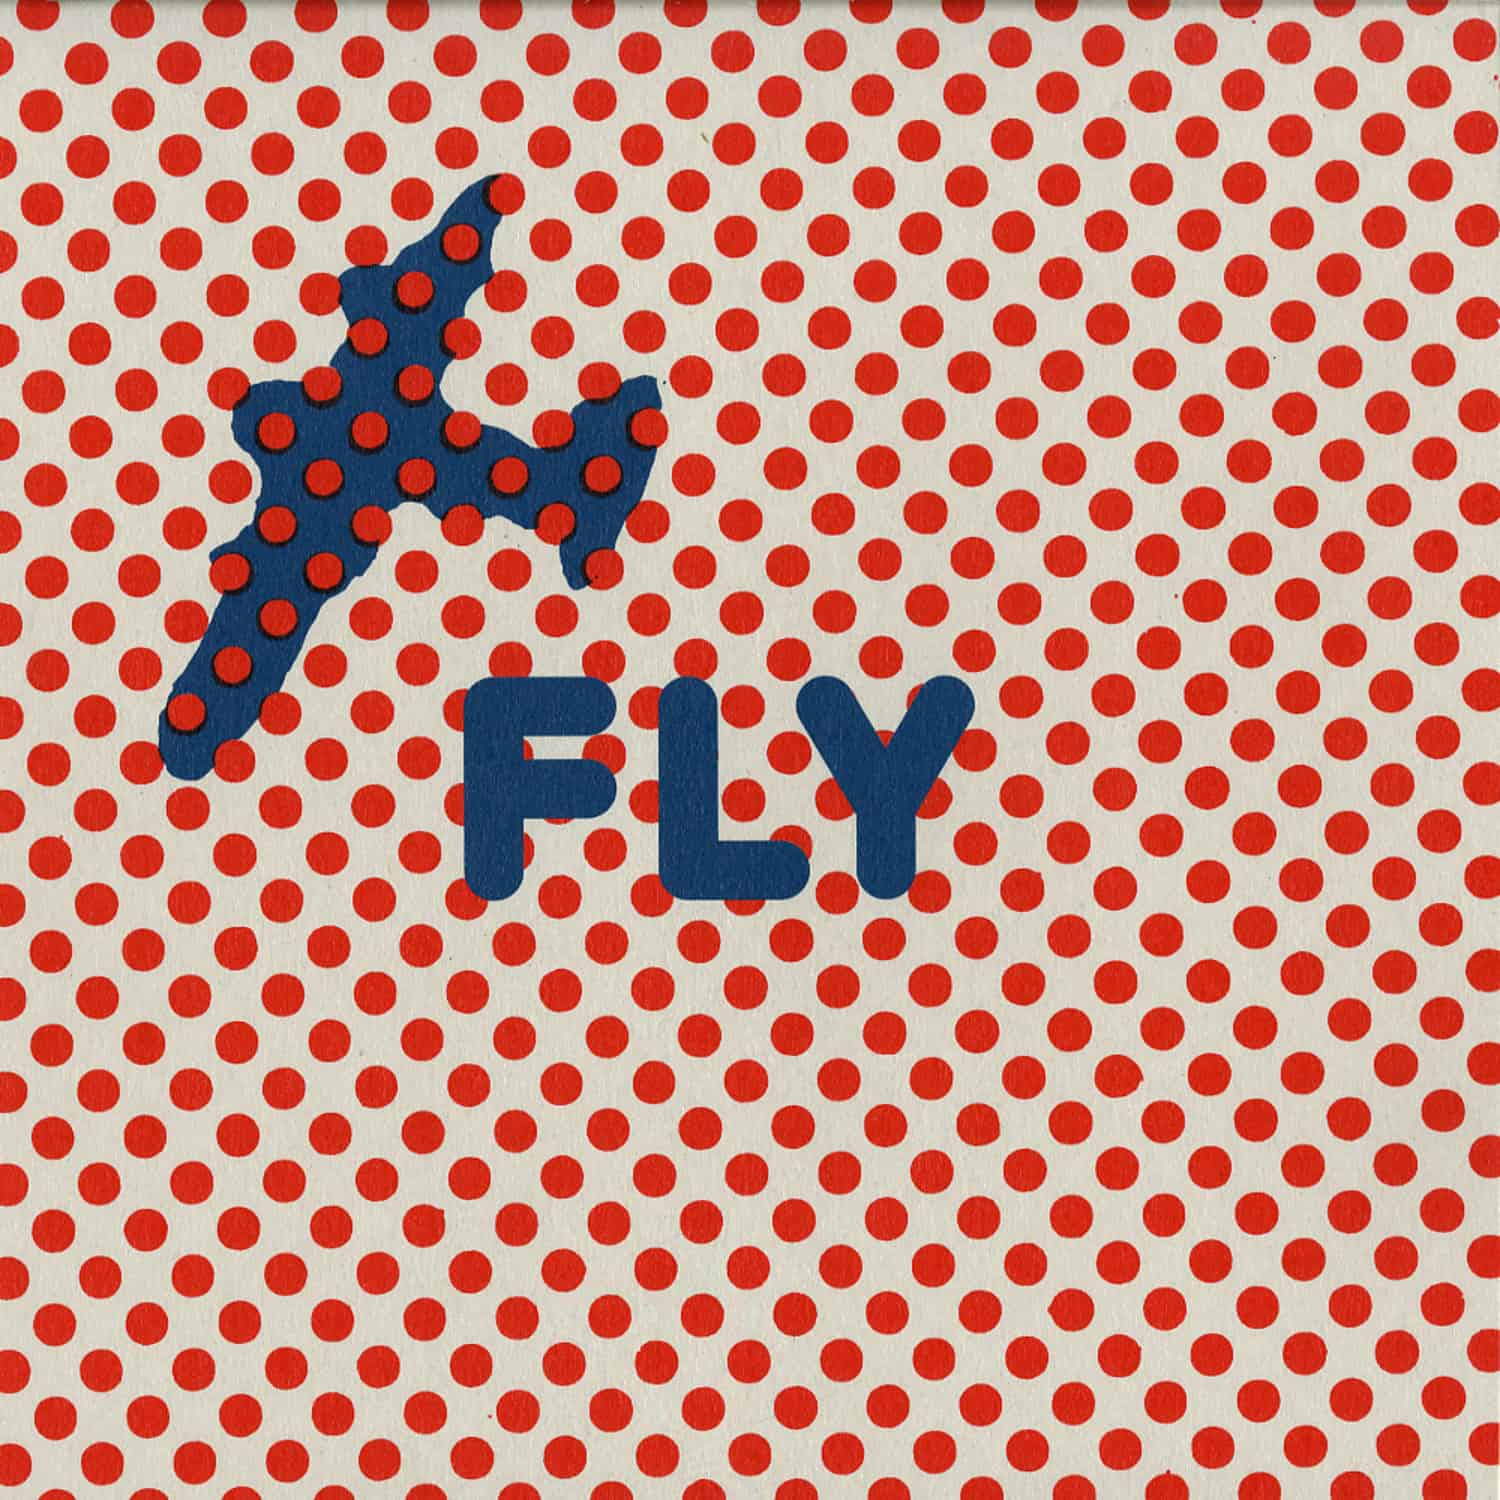 Kevin Harrison - FLY EP